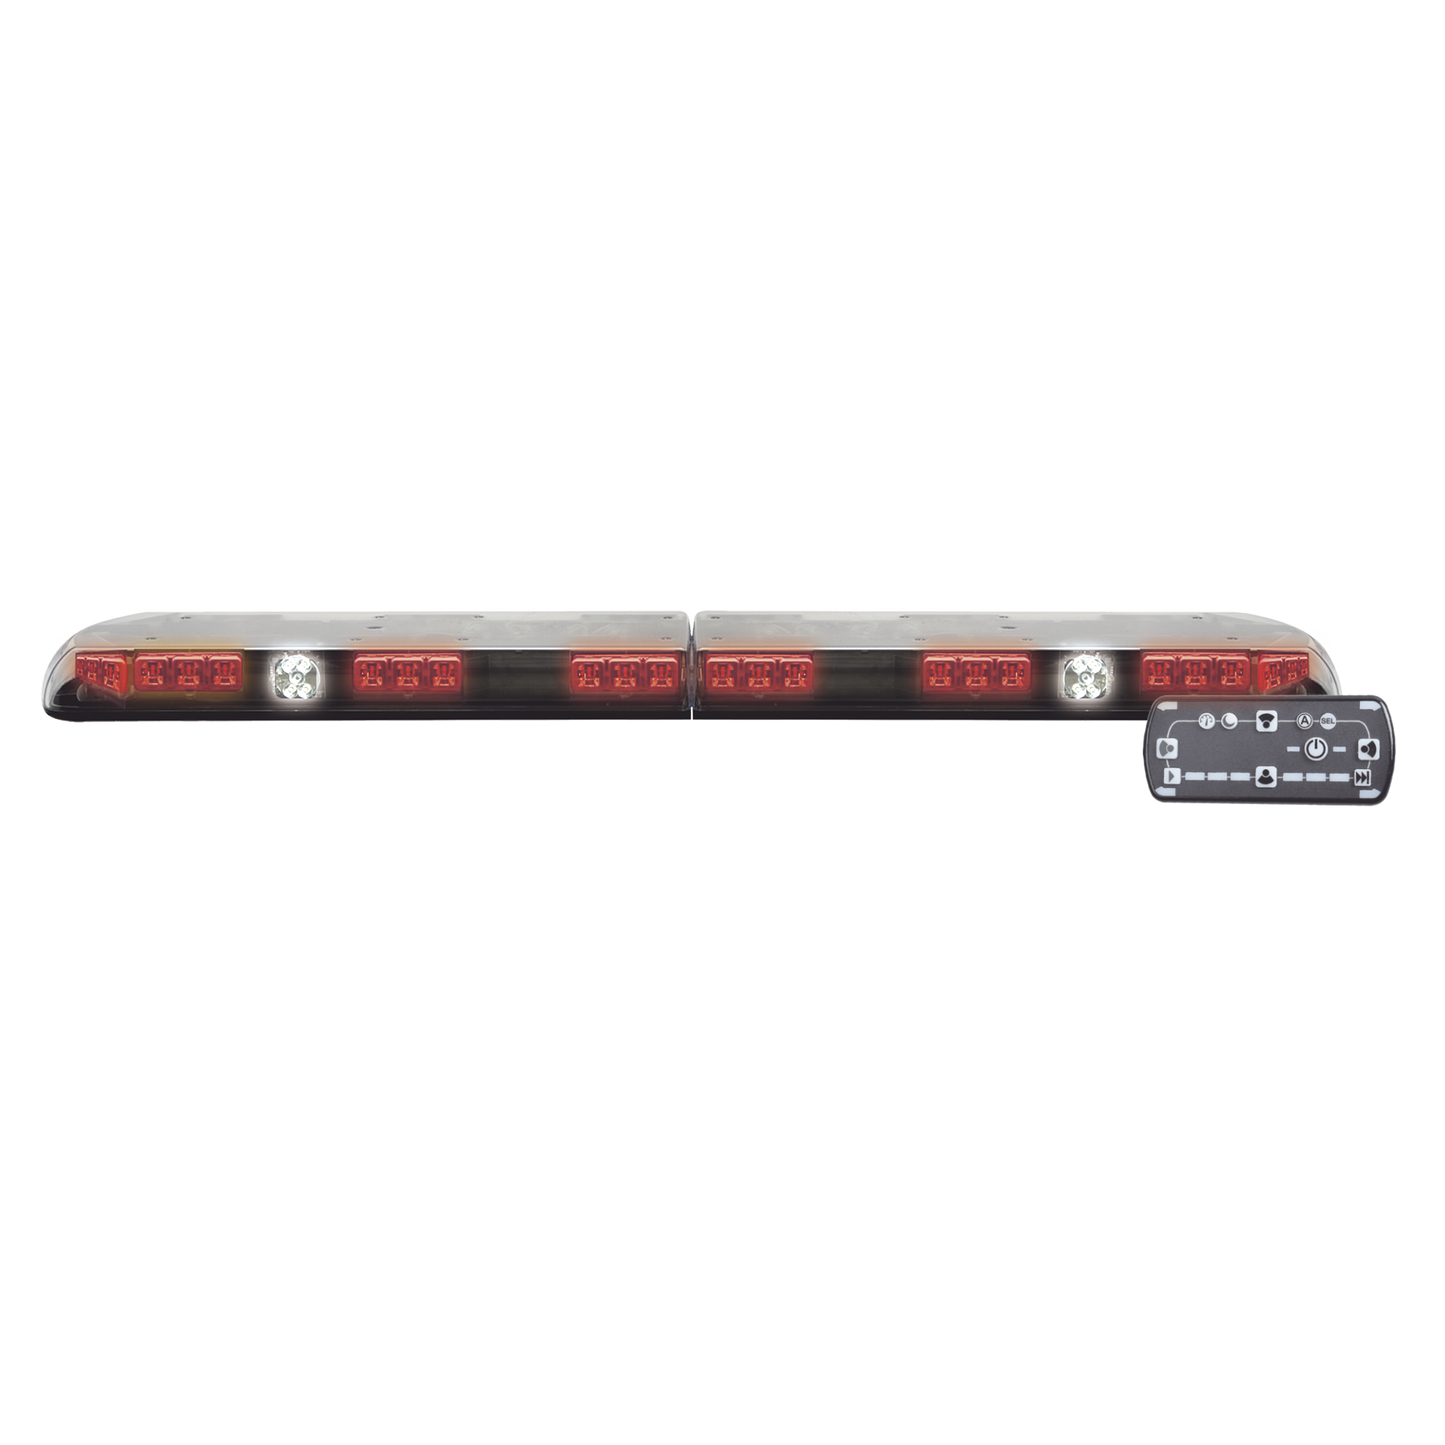 Red Color, 48" Ultra Bright Vantage PRO Light Bar, with 64 Powerful Last Generation LEDs